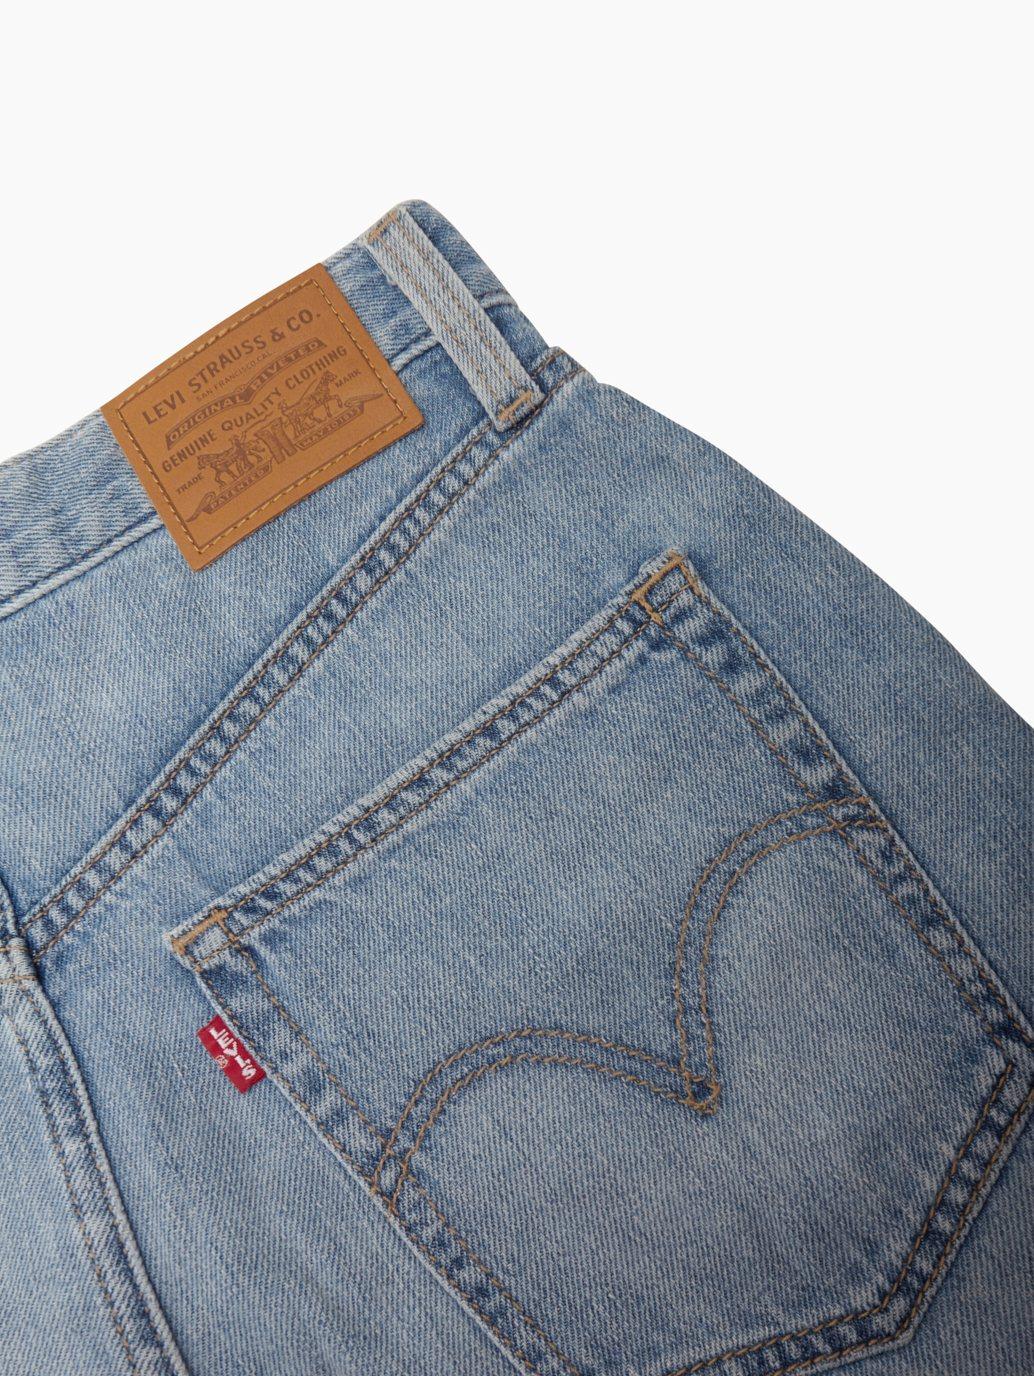 levis malaysia womens high loose shorts 394510009 18 Details